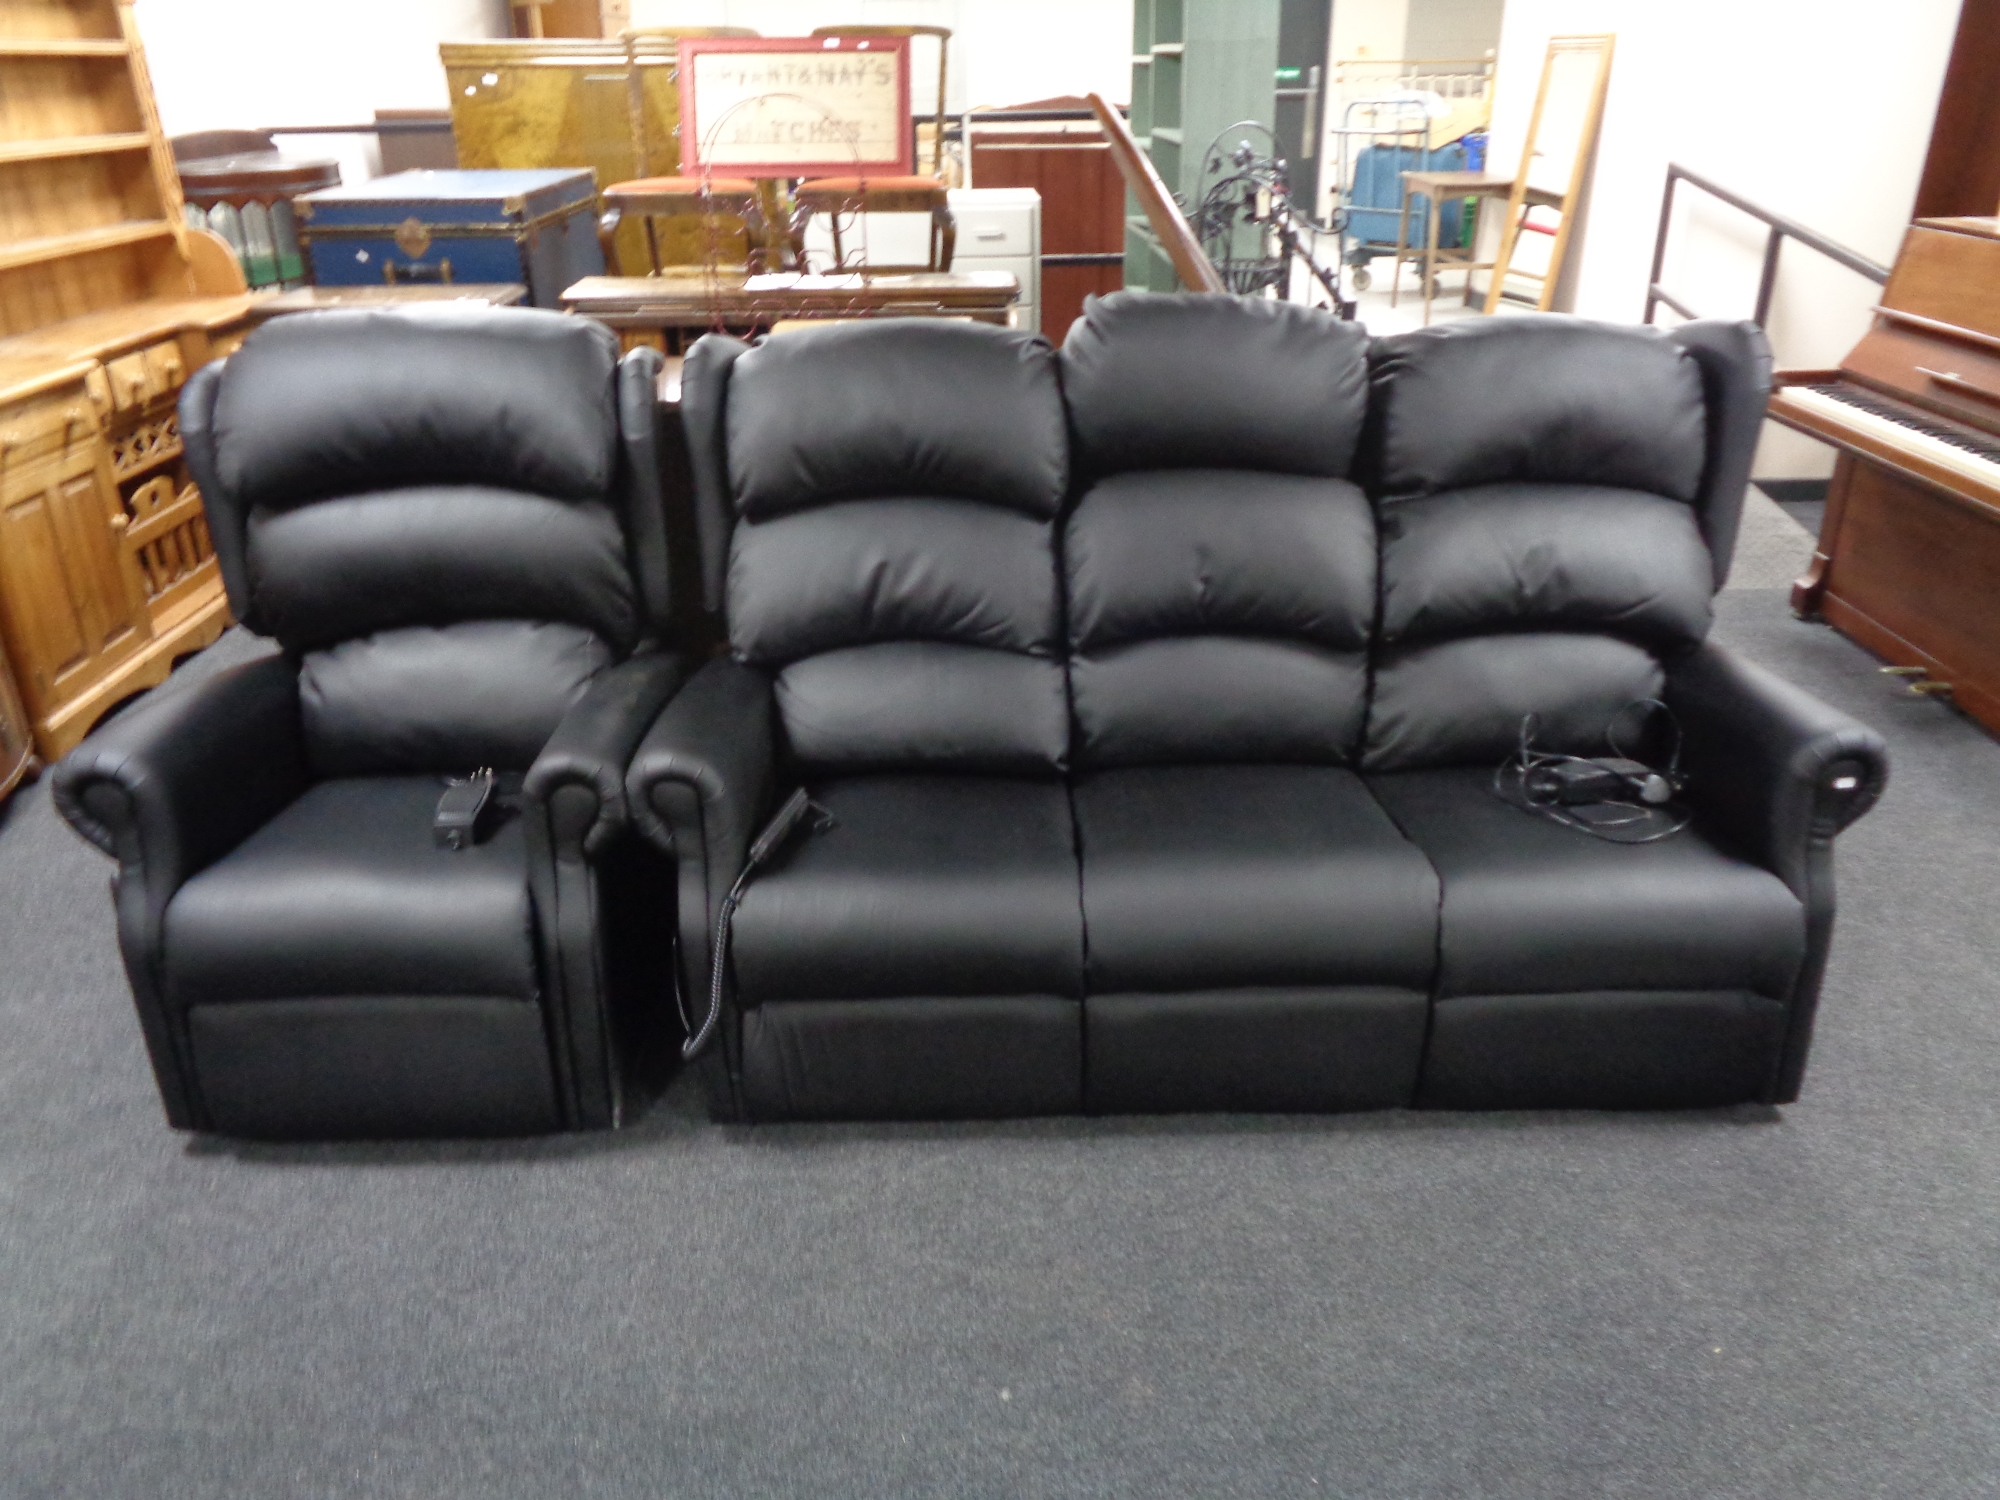 A black leather three seater electric reclining settee and matching armchair (Vendor has receipts